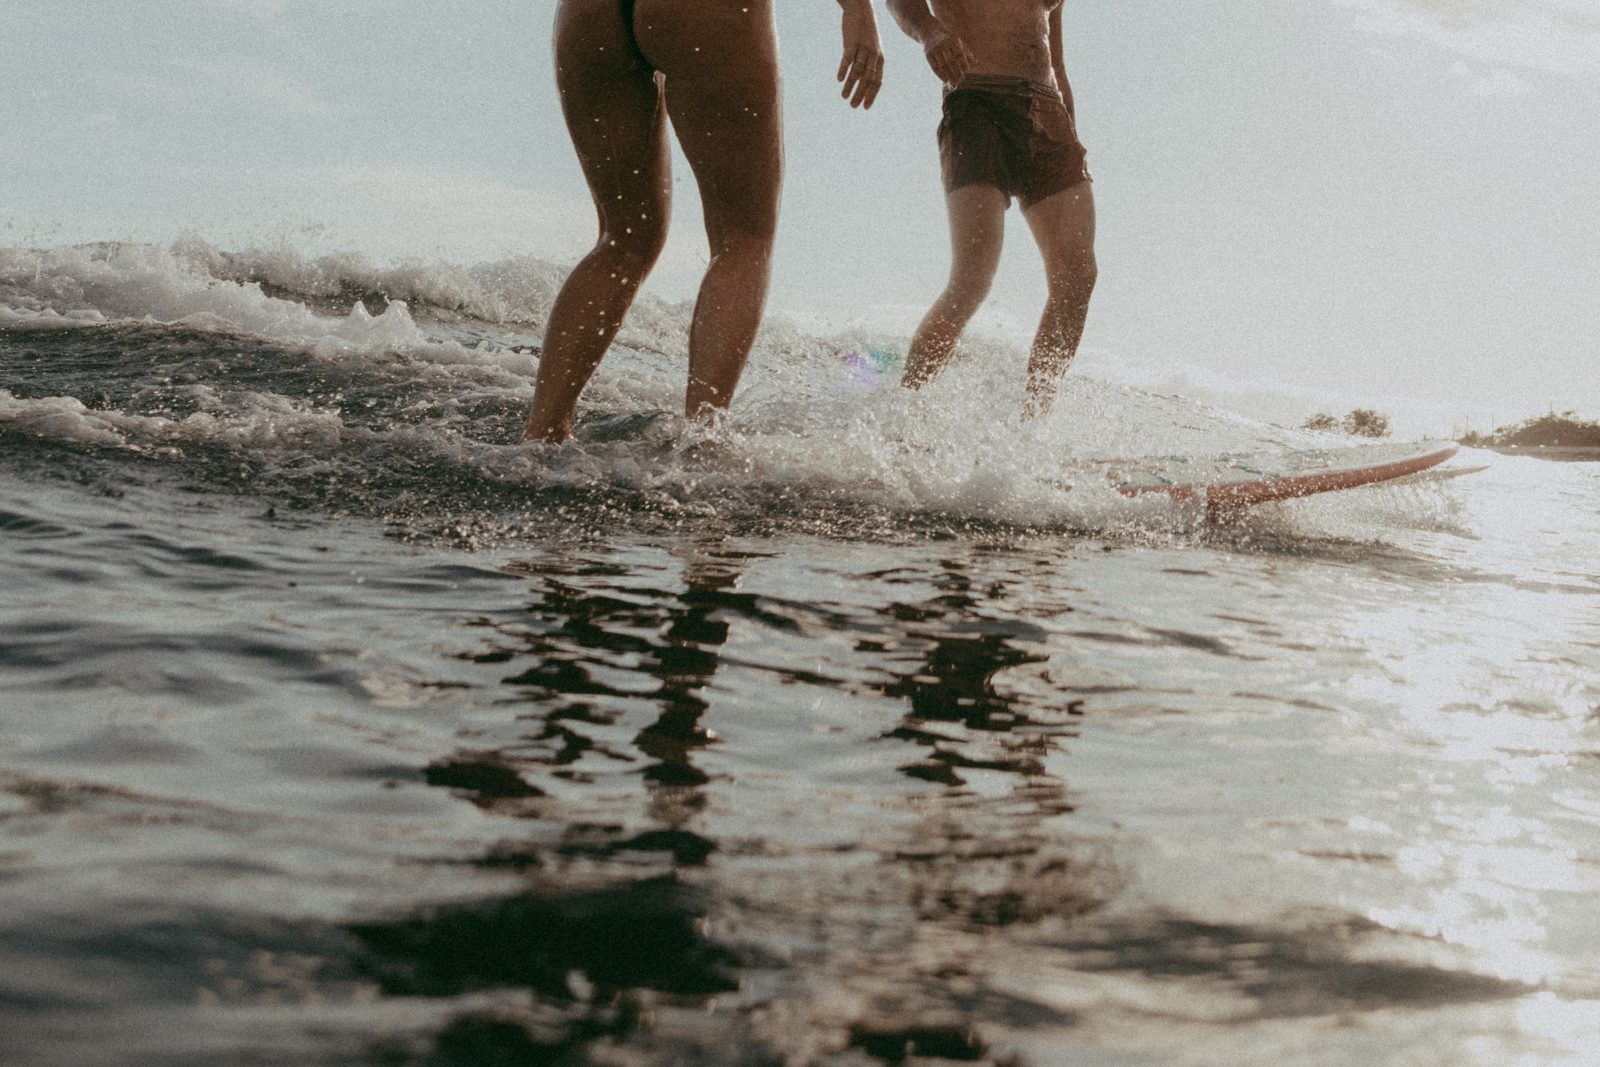 underwater couples photos on Maui on surfboards